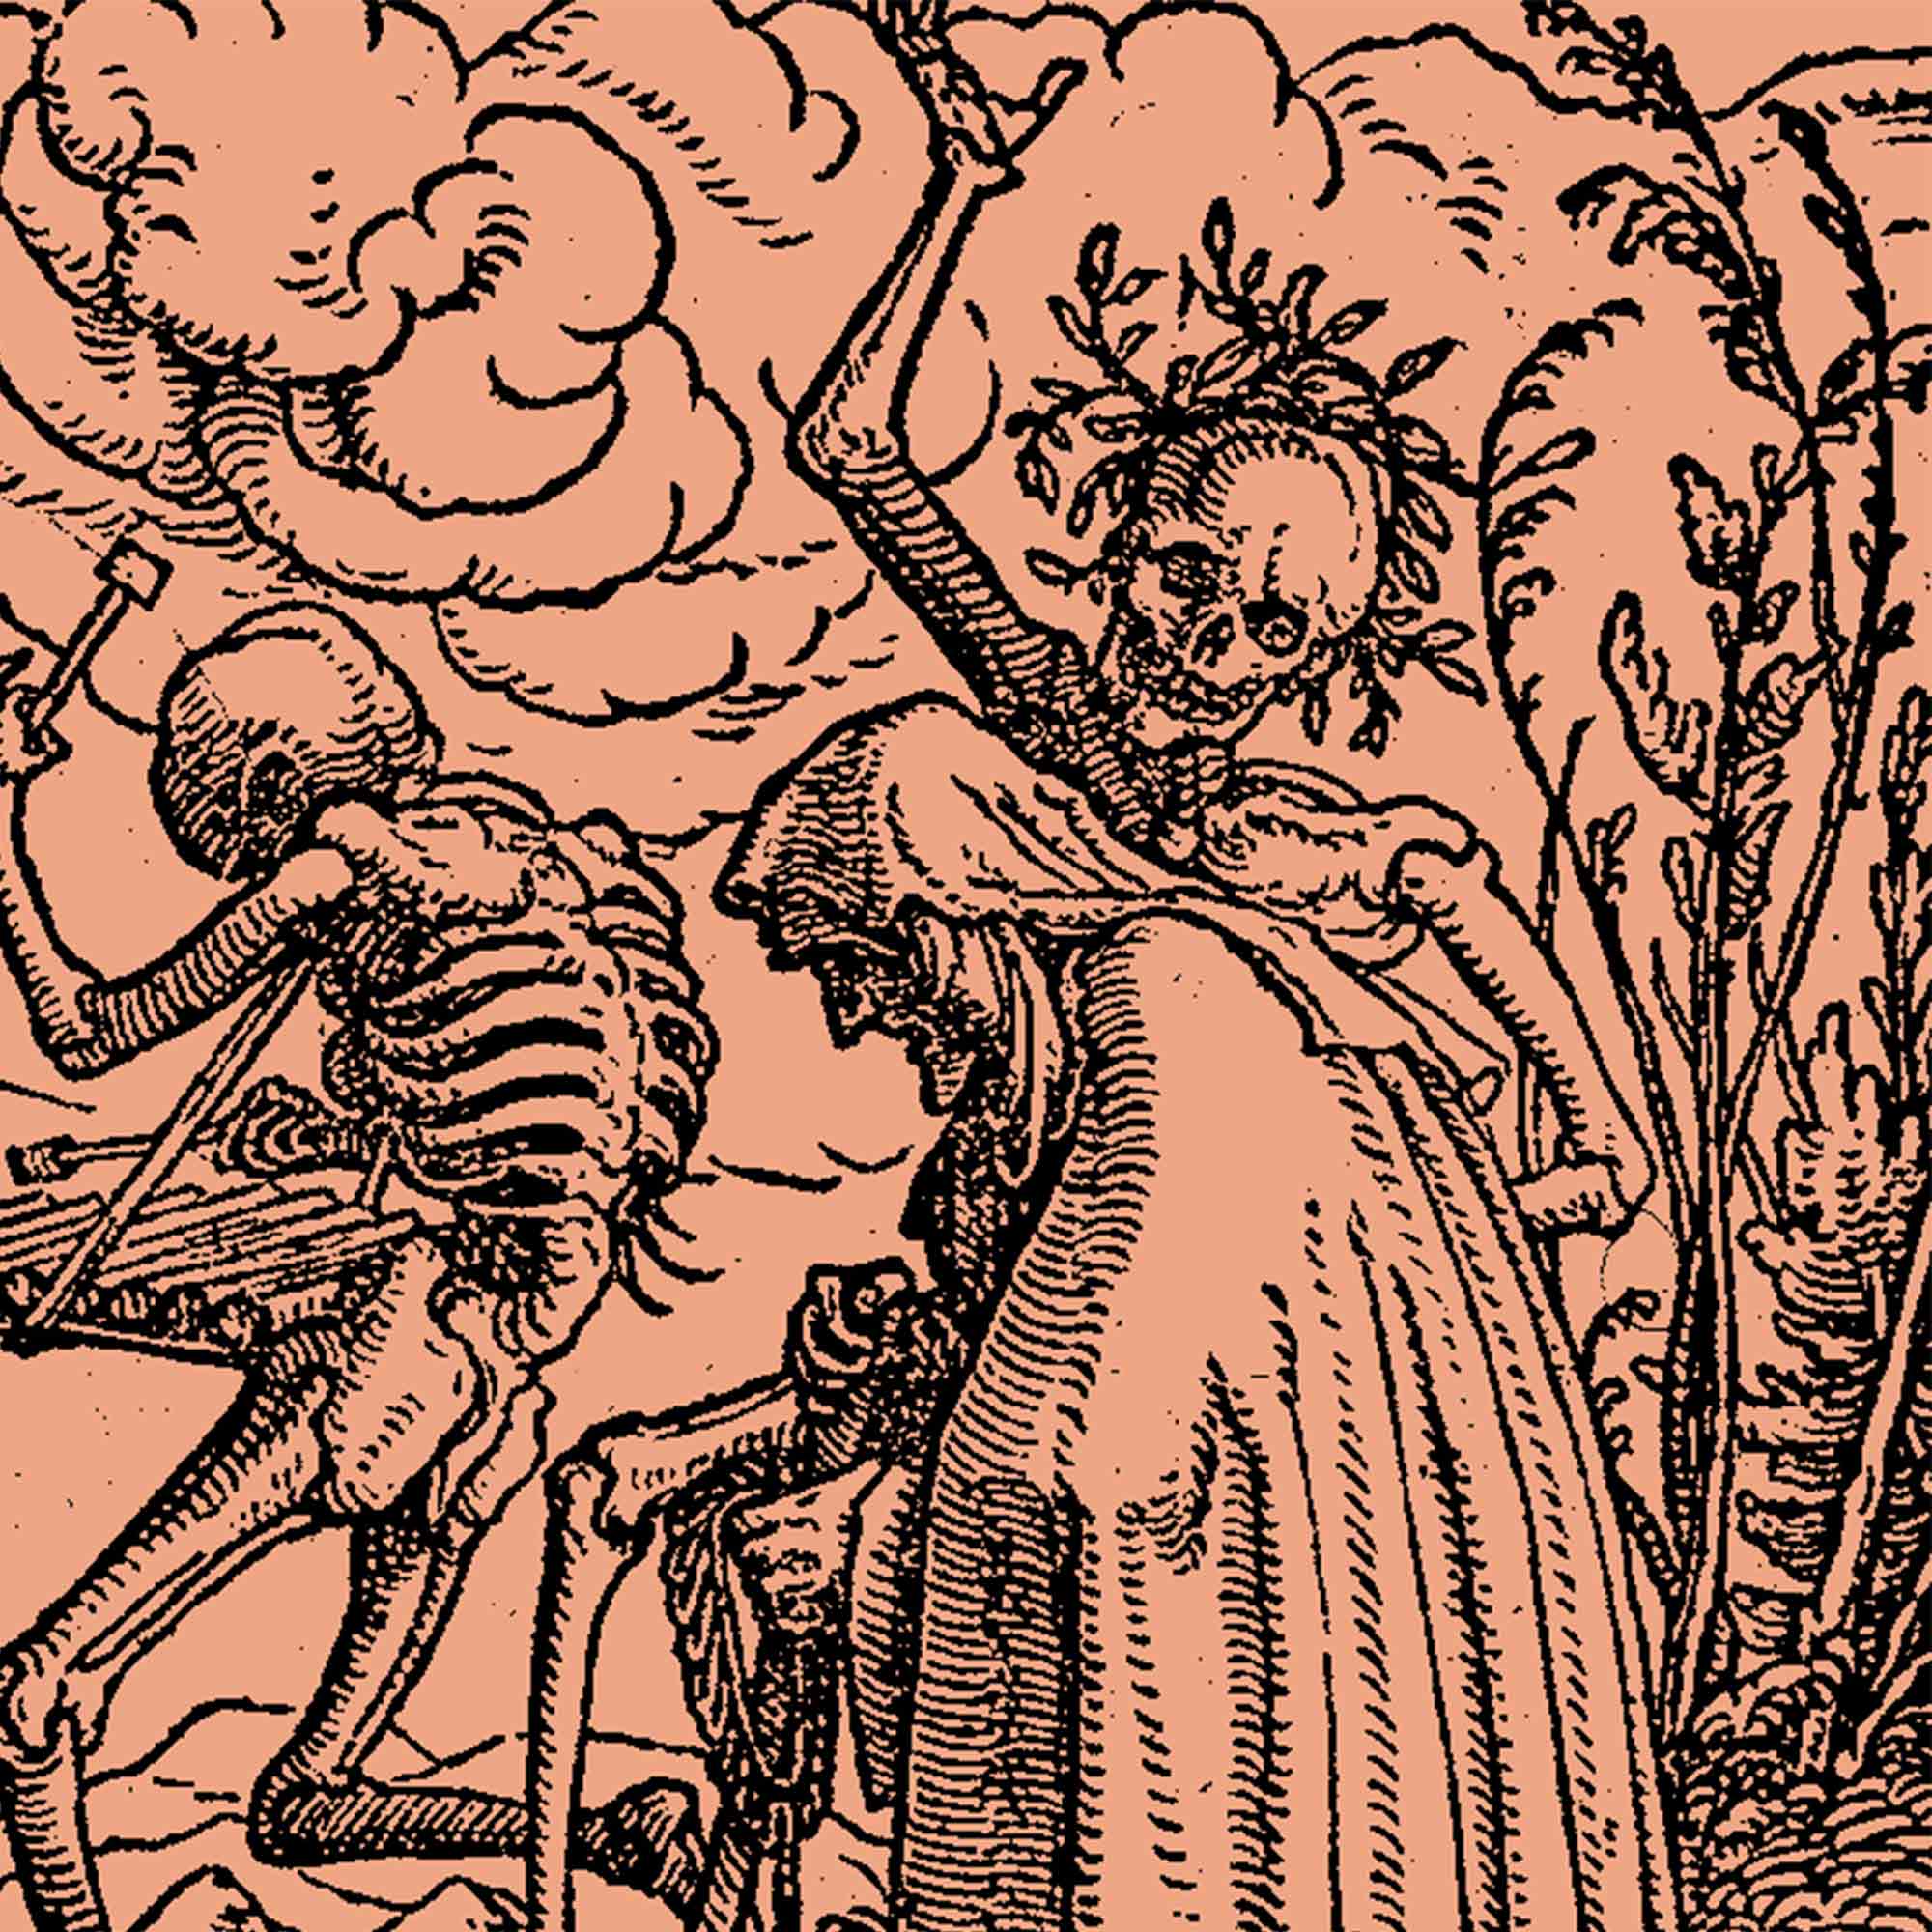 An introduction to The Dance of Death and it's symbolic meanings